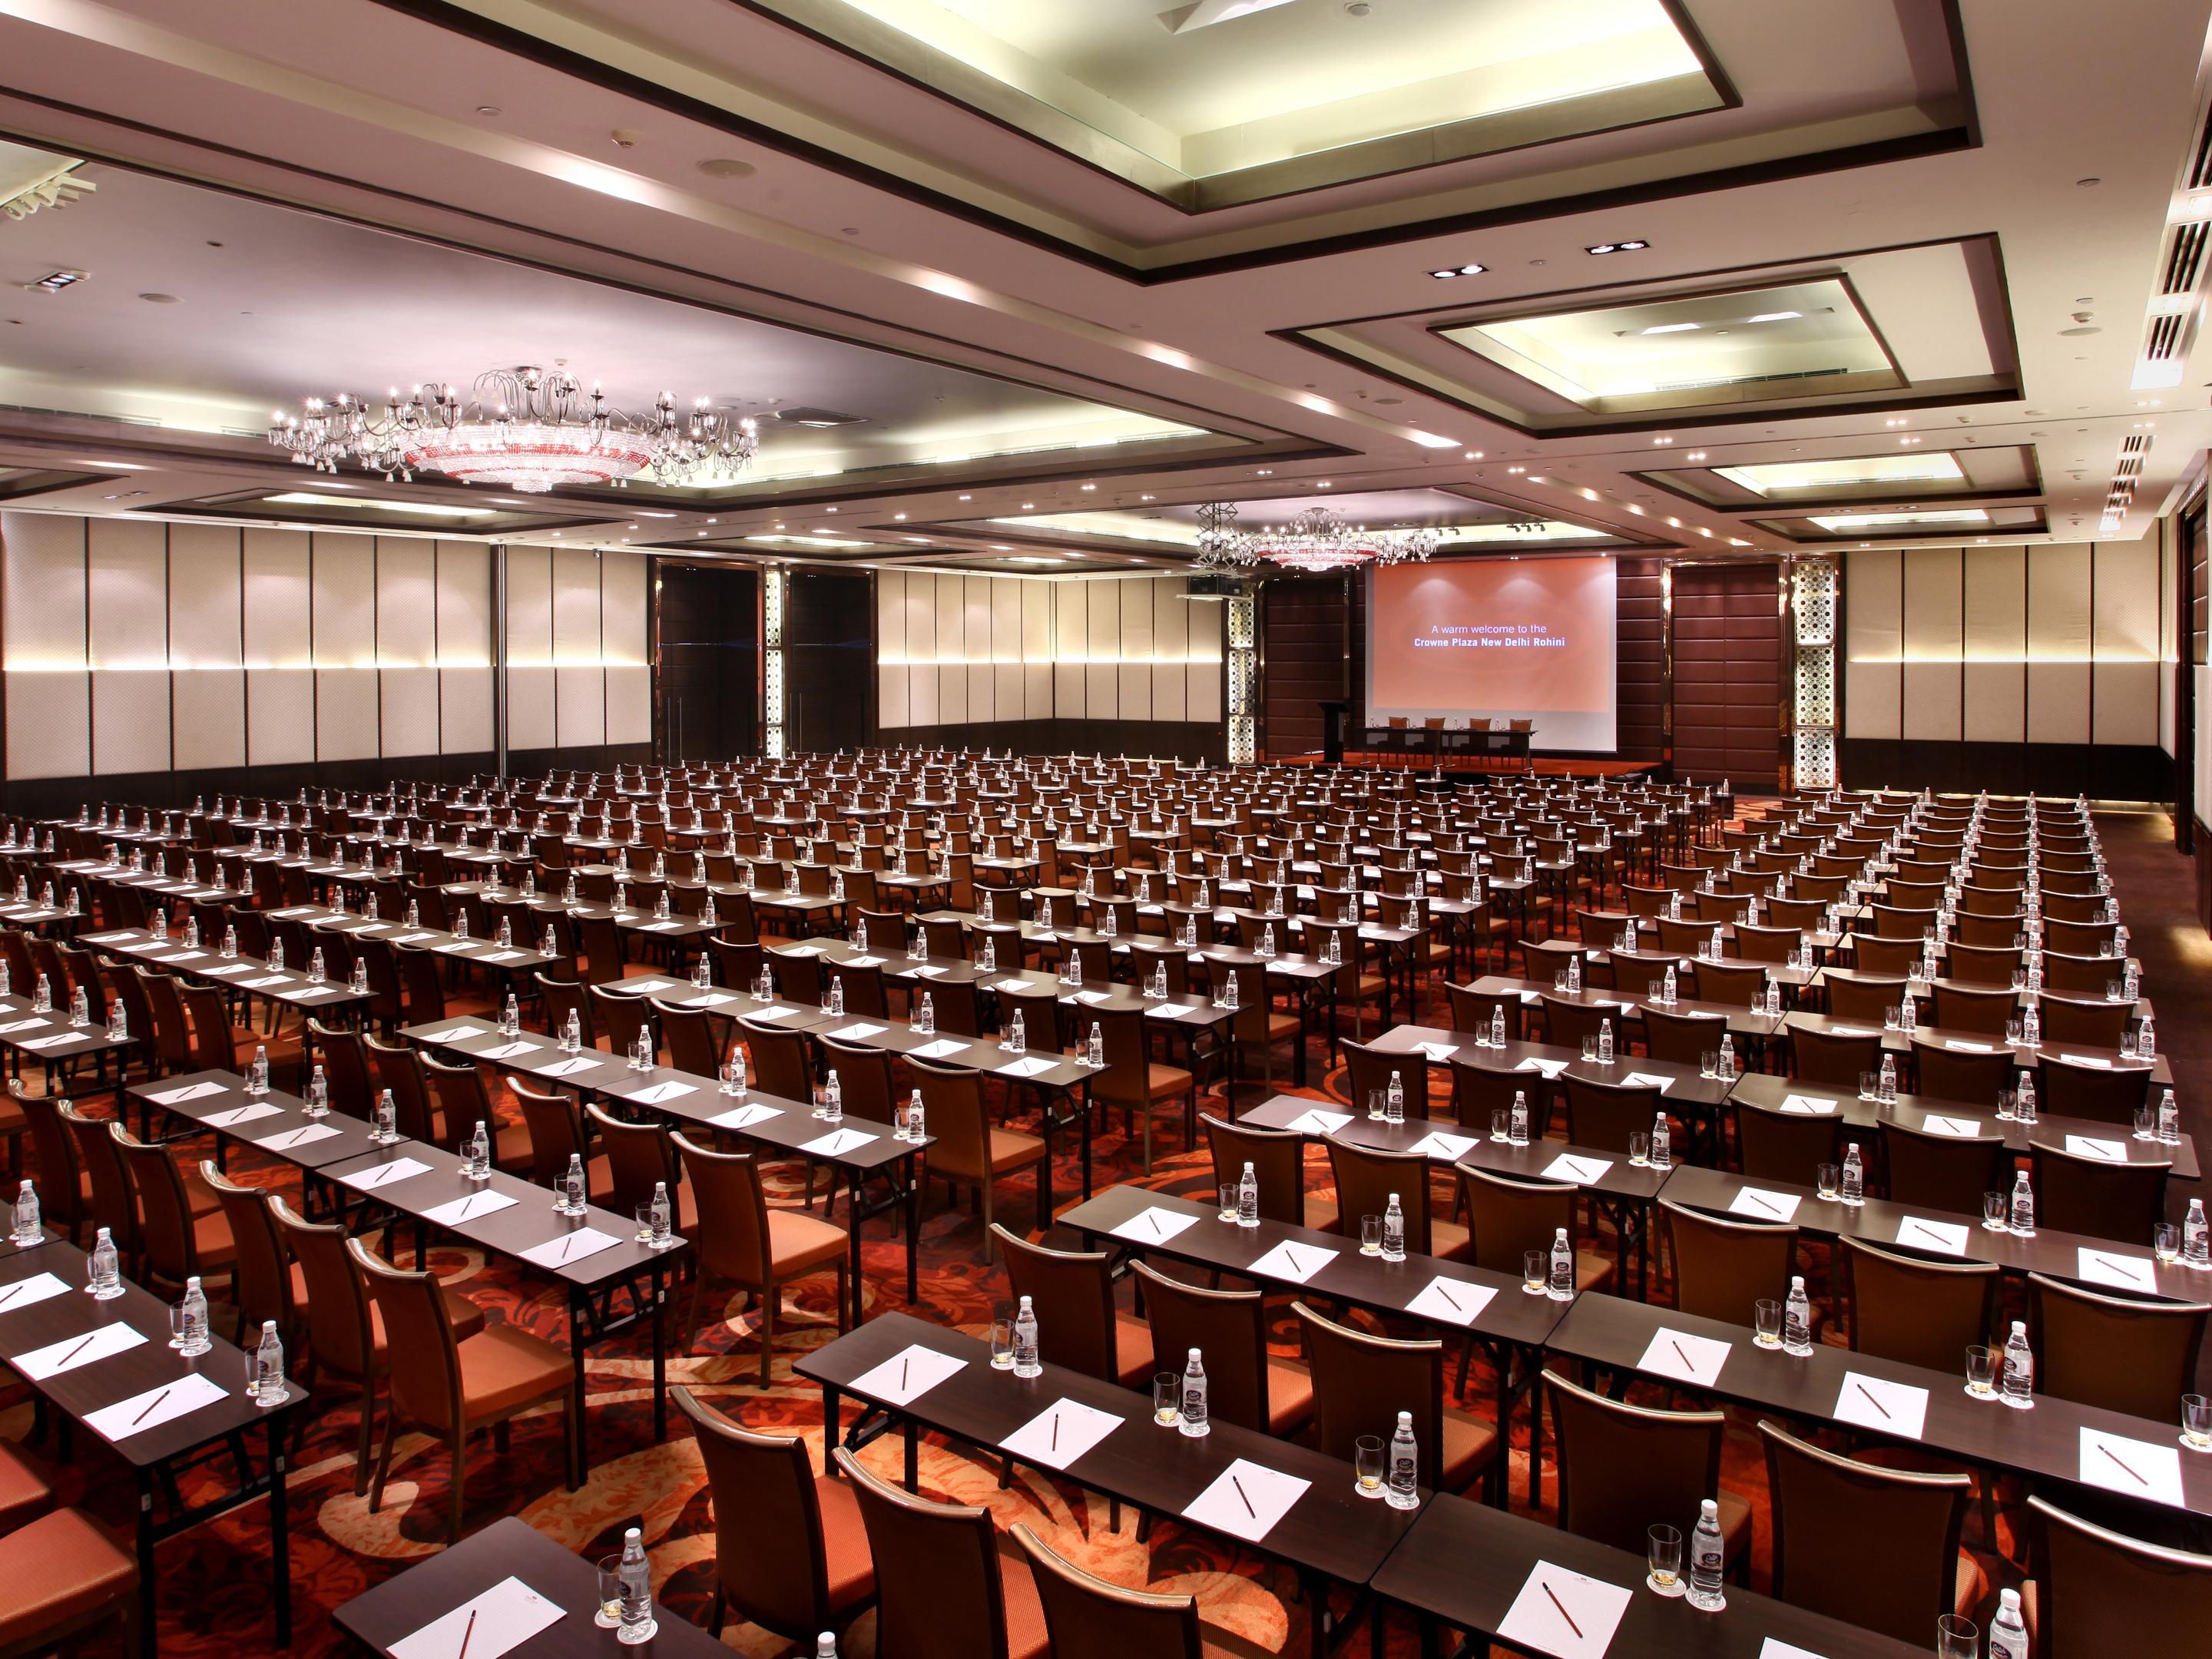 With one of the largest meeting spaces in the city with 55,000 sq.ft. area, hotel comprises of 11 elegant designed meeting spaces catering to various events. It has flexible spaces & a variety of customized catering options that suit each requirement. Hotel also offers a dedicated Concierge and ensures a 2-hour response guarantee to all inquiries.